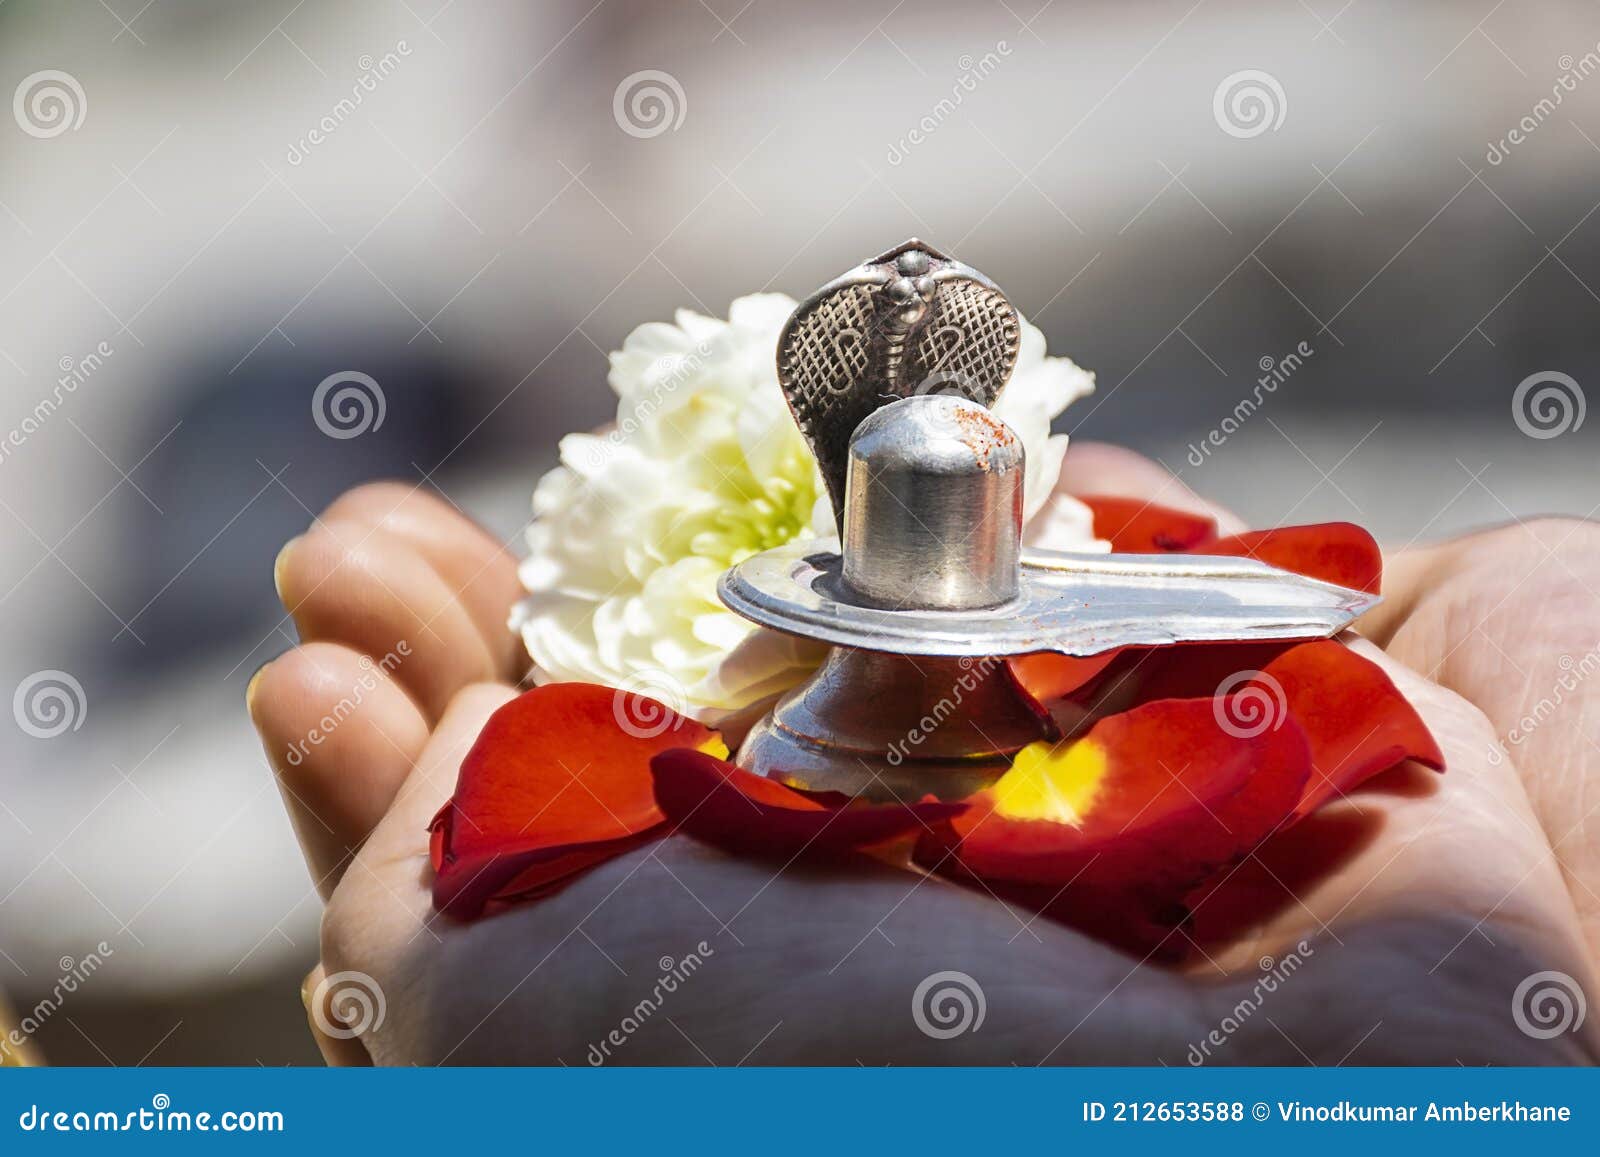 Stock Photo of a Man Holding and Worshiping Silver Shivlinga Which ...